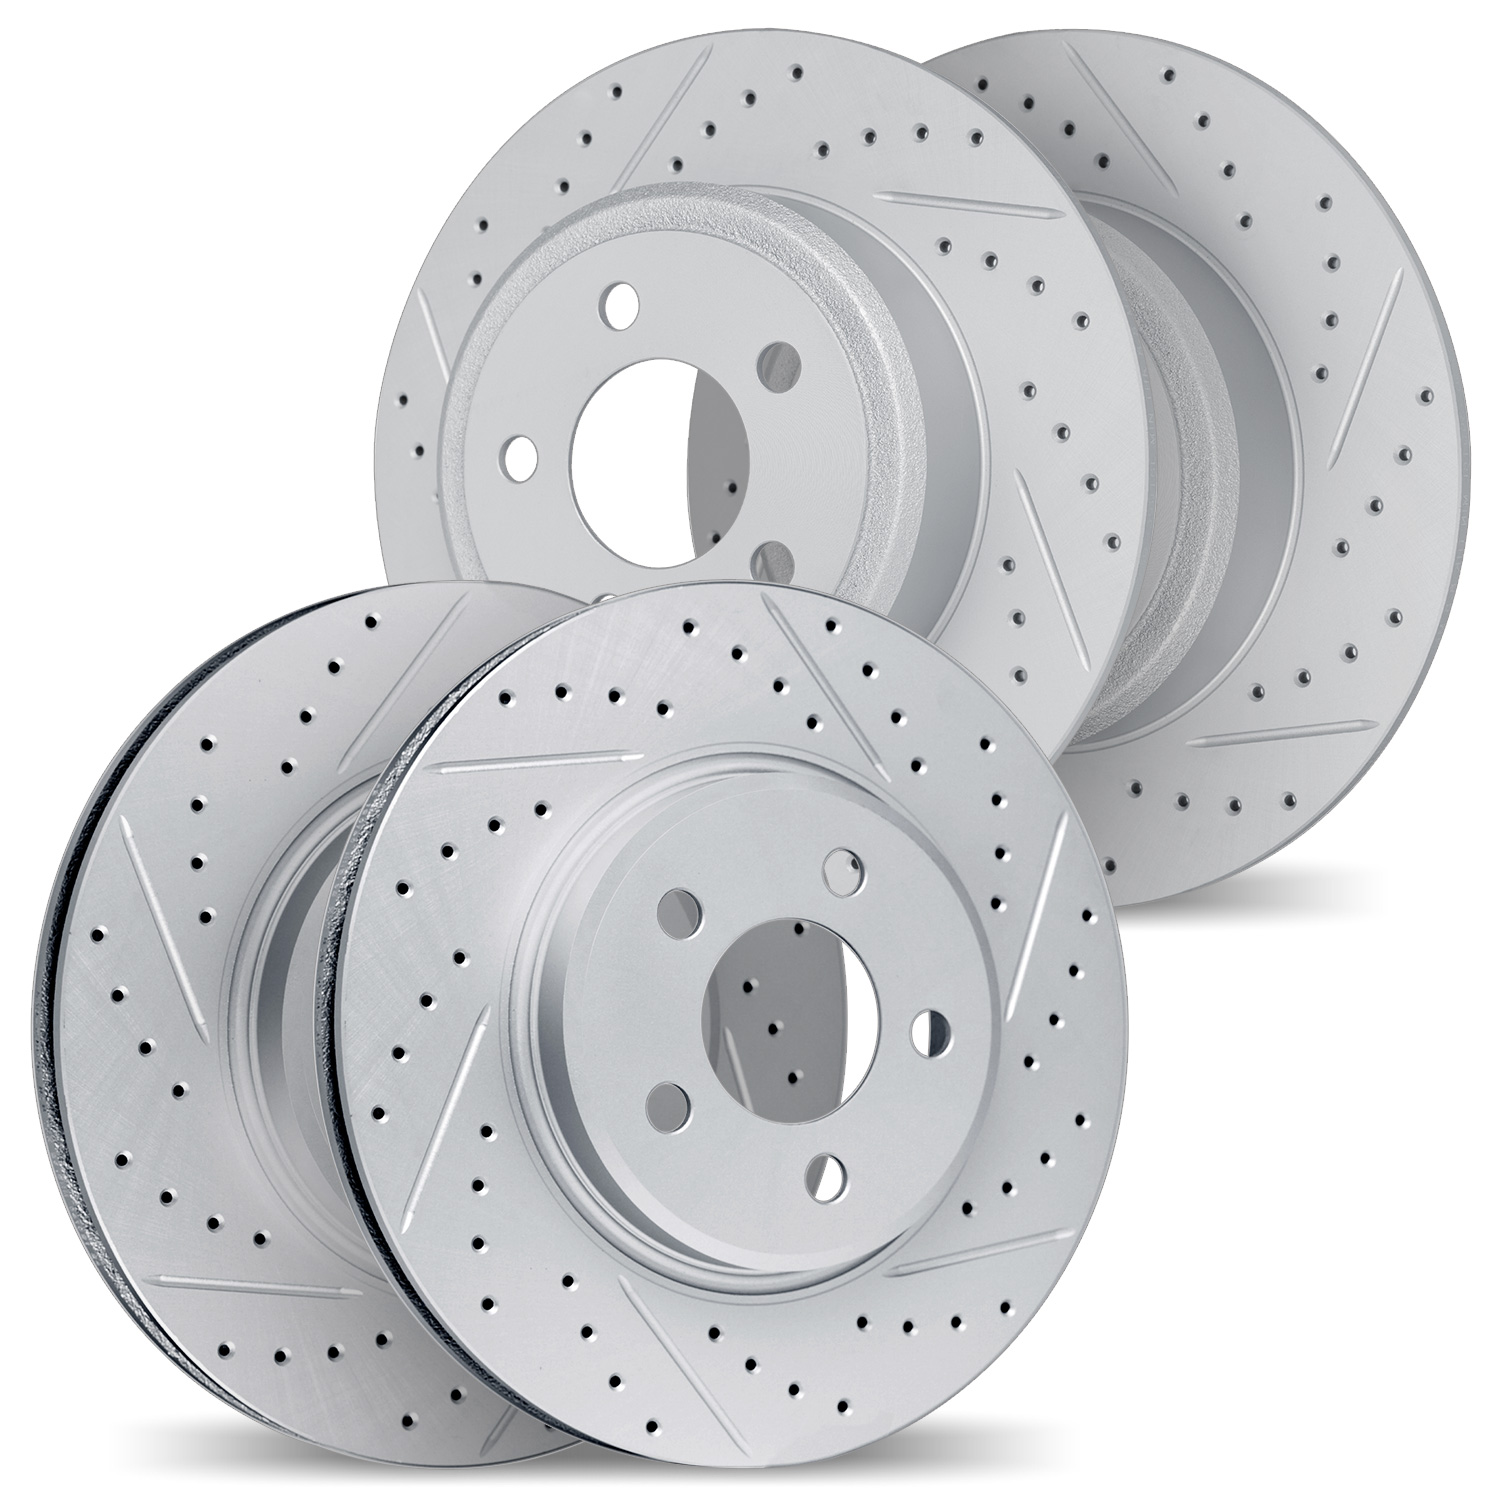 2004-53001 Geoperformance Drilled/Slotted Brake Rotors, 2004-2012 GM, Position: Front and Rear